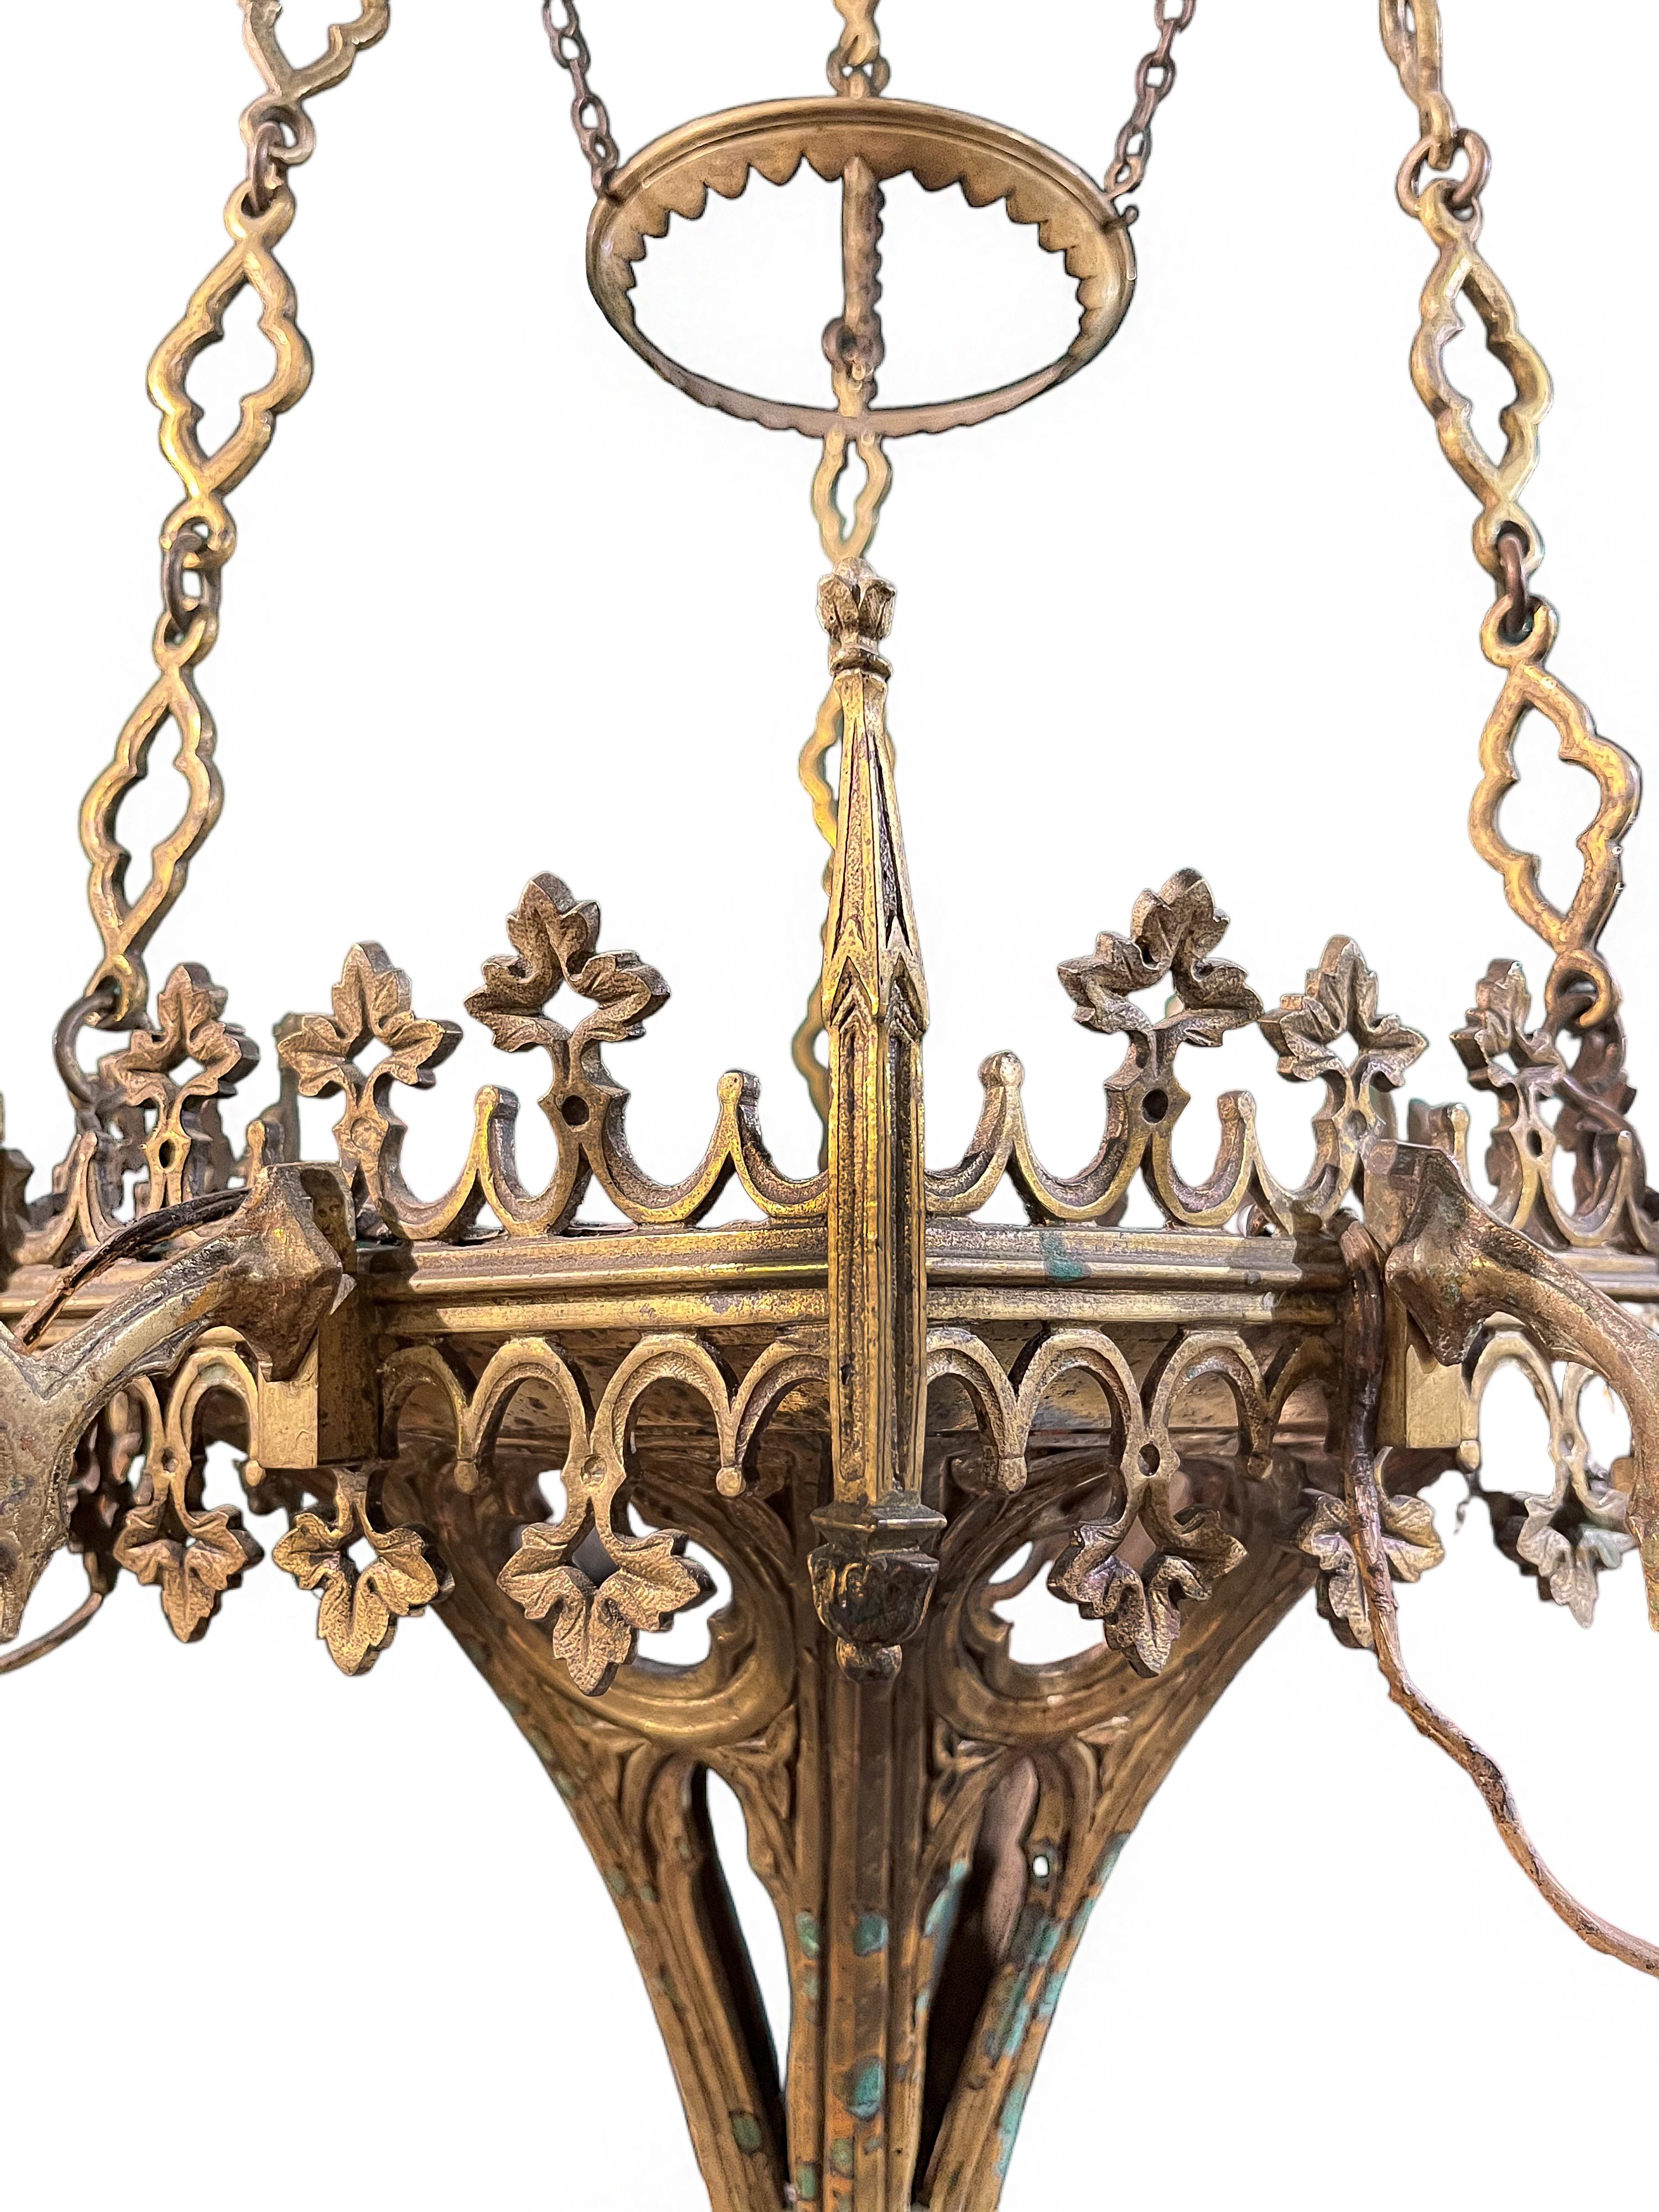 The bronze chandelier is comprised of a foliate canopy with elongated quatrefoil link chains, suspending a tapering basket encircled by gothic grape vine tracery and mounted with six arched candle arms. The basket is cast with quatrefoils above